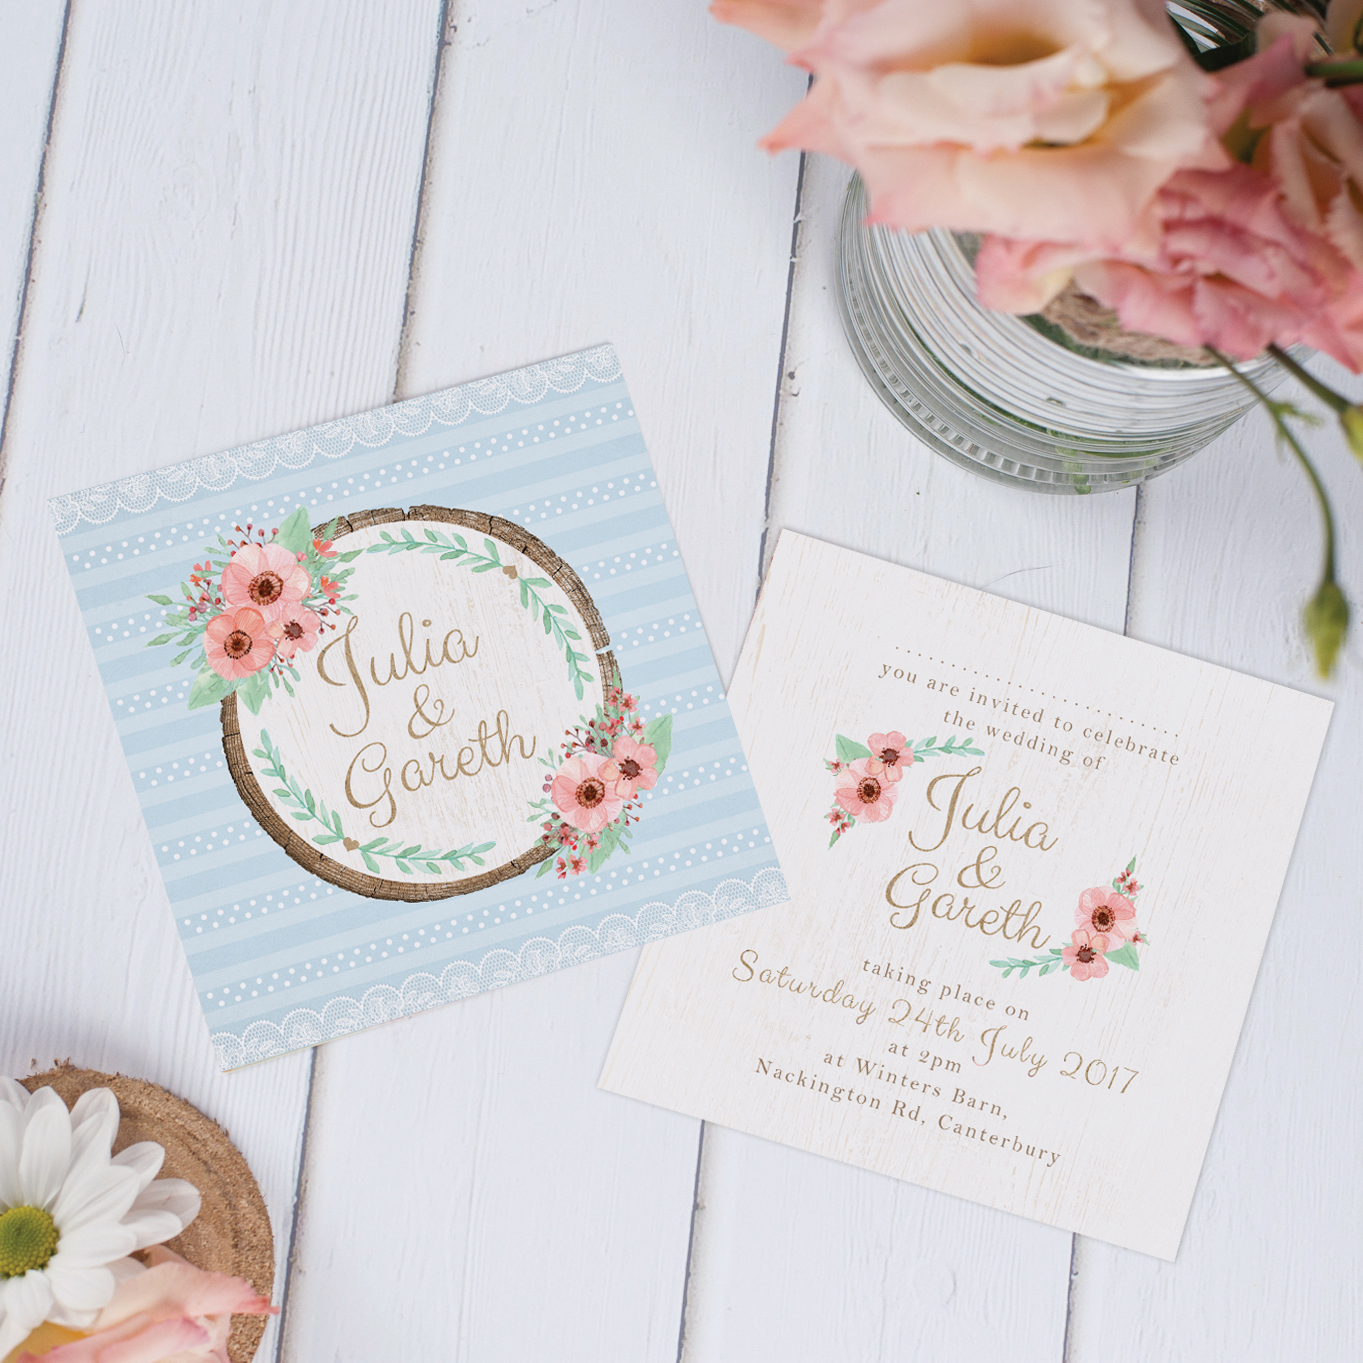 Enchanted Woods spring wedding invite with wood log detail